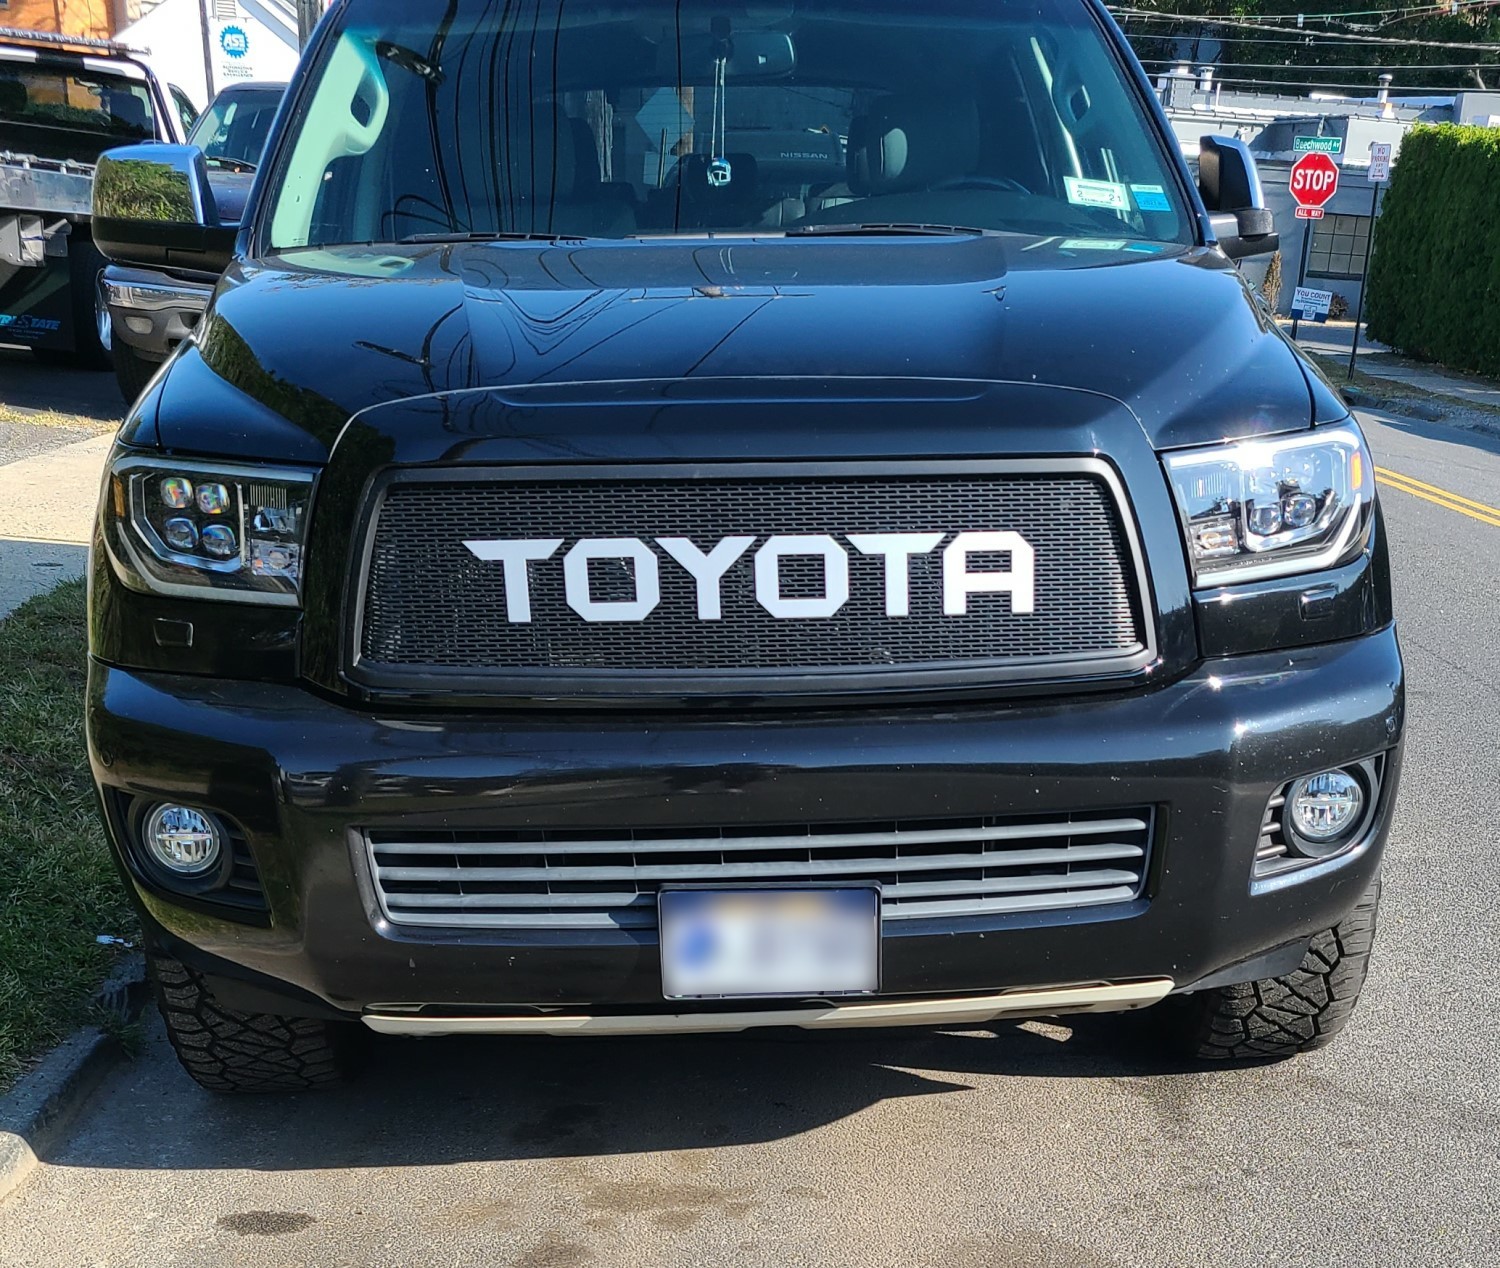 2008-17 Toyota Sequoia Mesh Grill Insert with Big Letters by